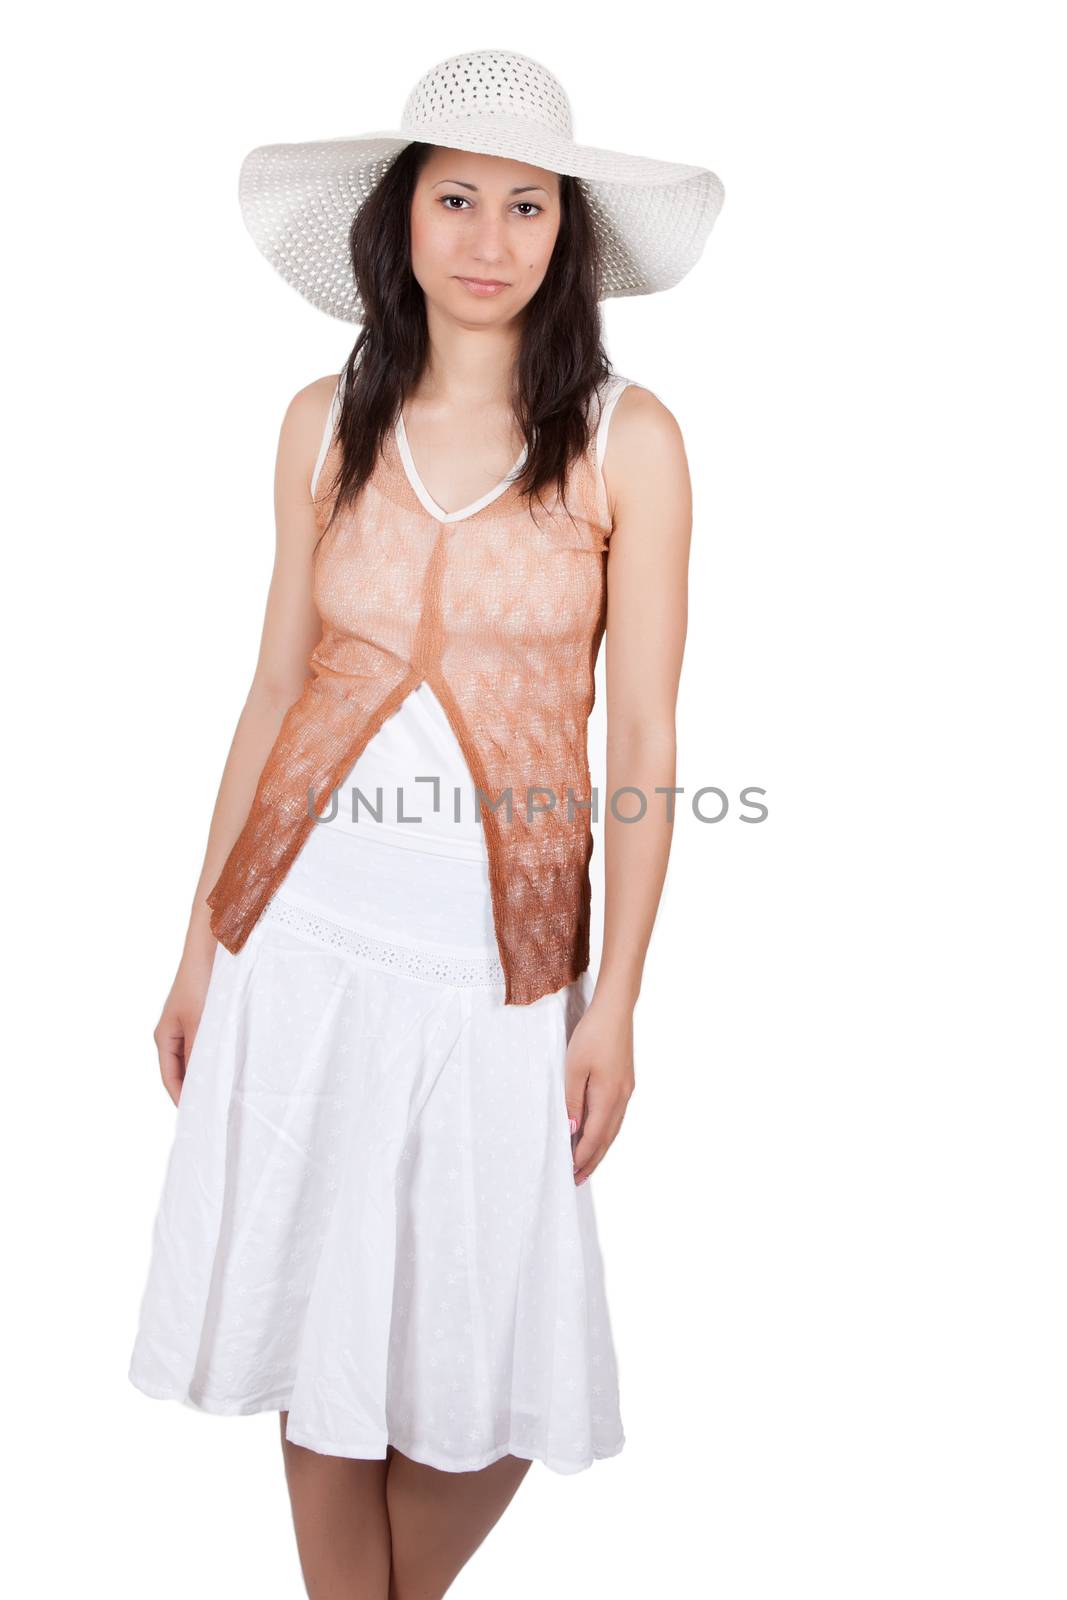 Woman in white sun hat by maros_b